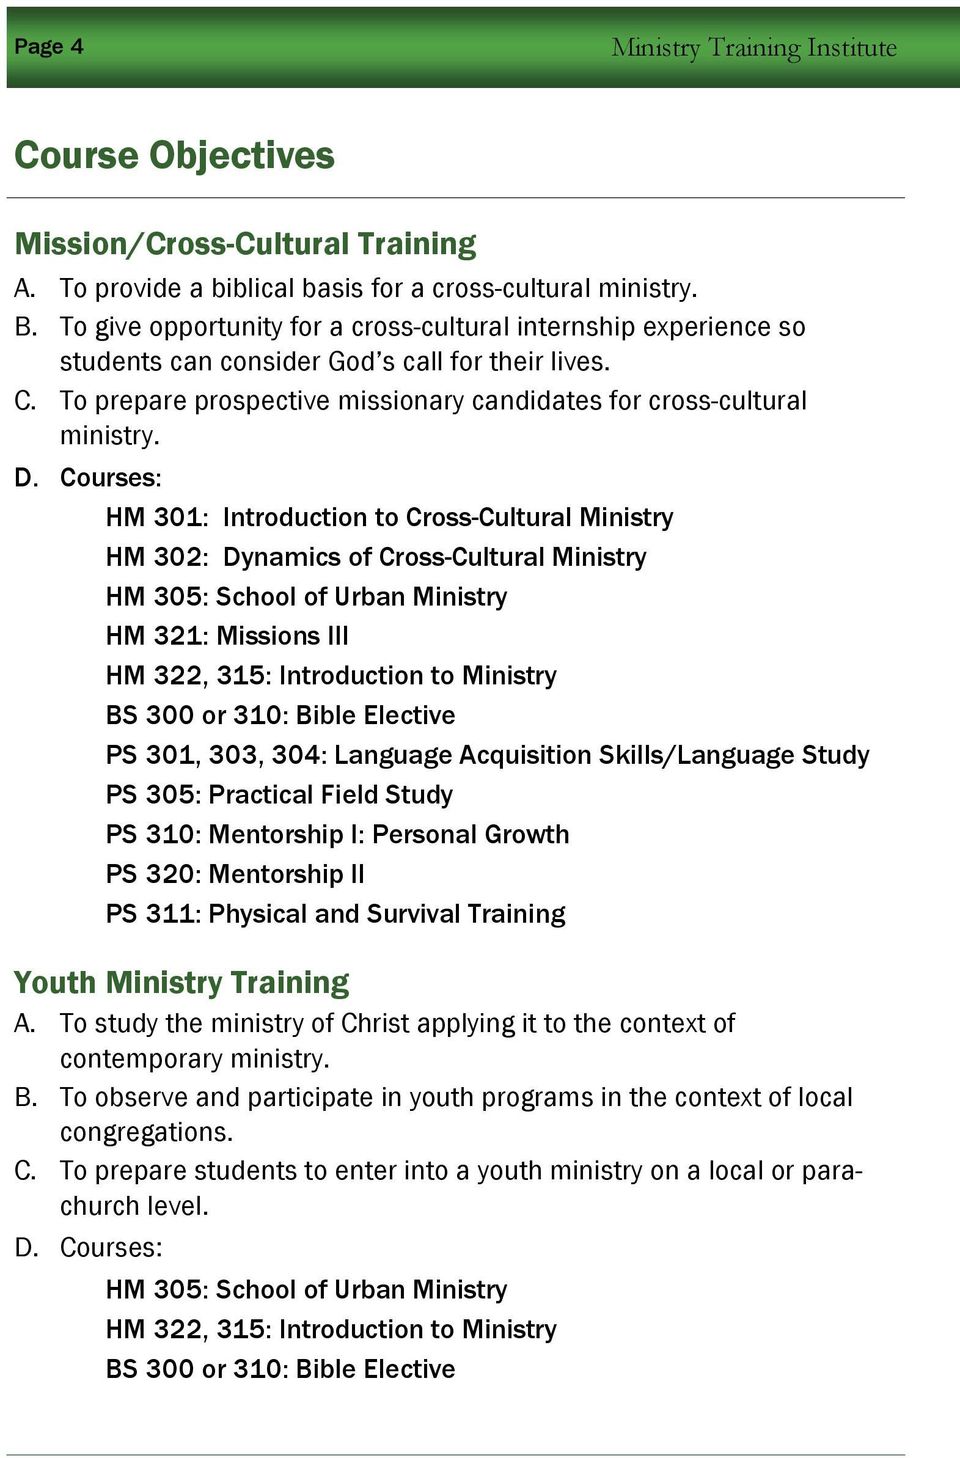 Courses: HM 301: Introduction to Cross-Cultural Ministry HM 302: Dynamics of Cross-Cultural Ministry HM 305: School of Urban Ministry HM 321: Missions III HM 322, 315: Introduction to Ministry BS 300